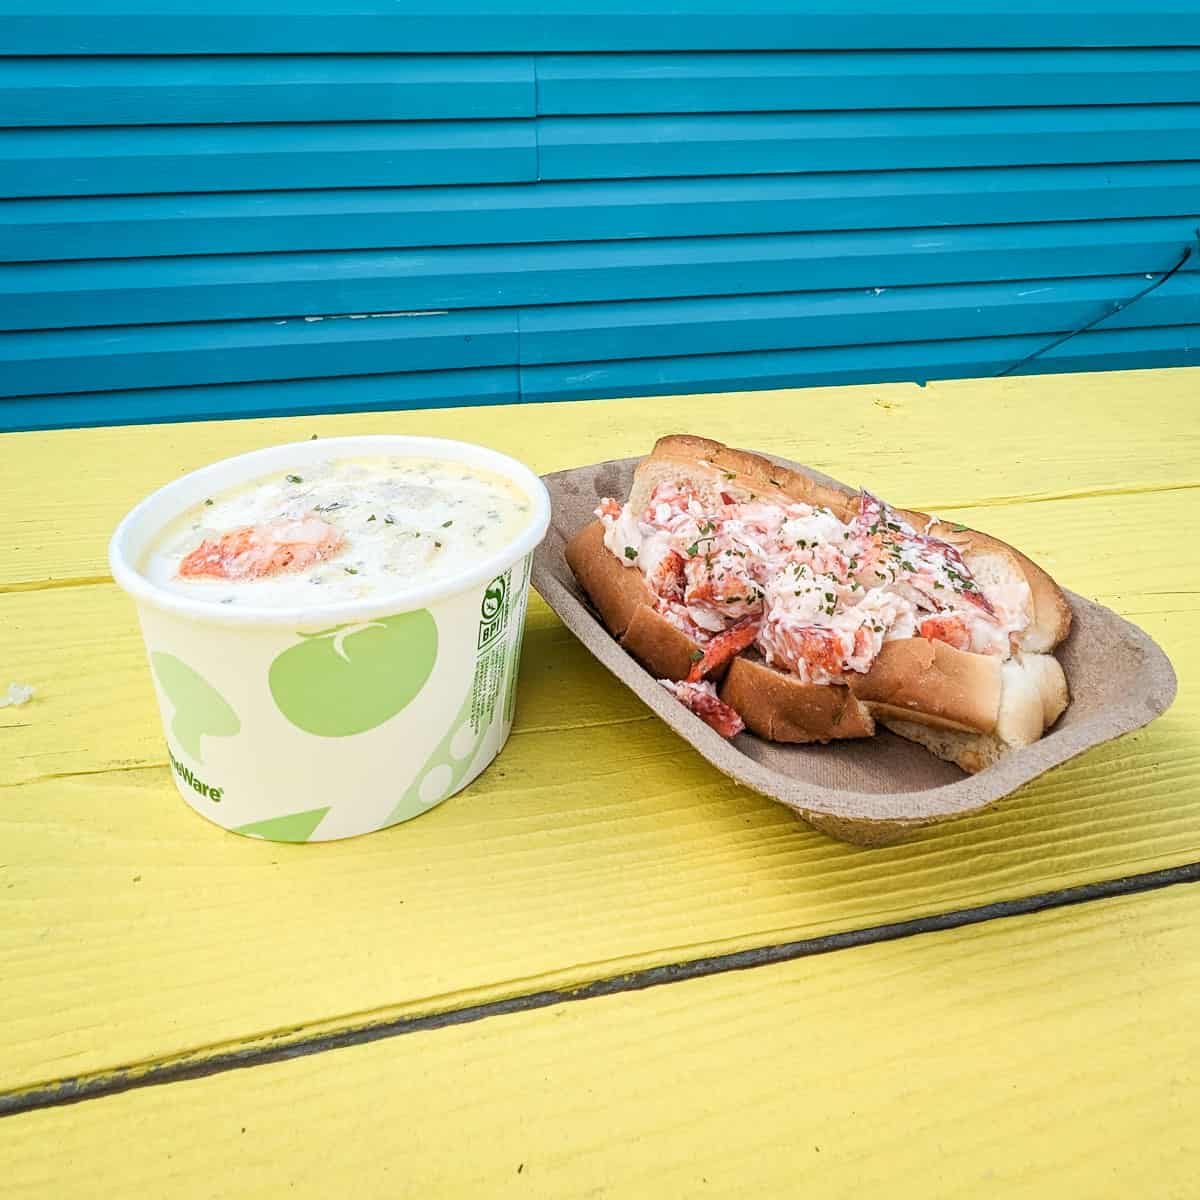 A lobster roll and chowder from The Crow's Nest